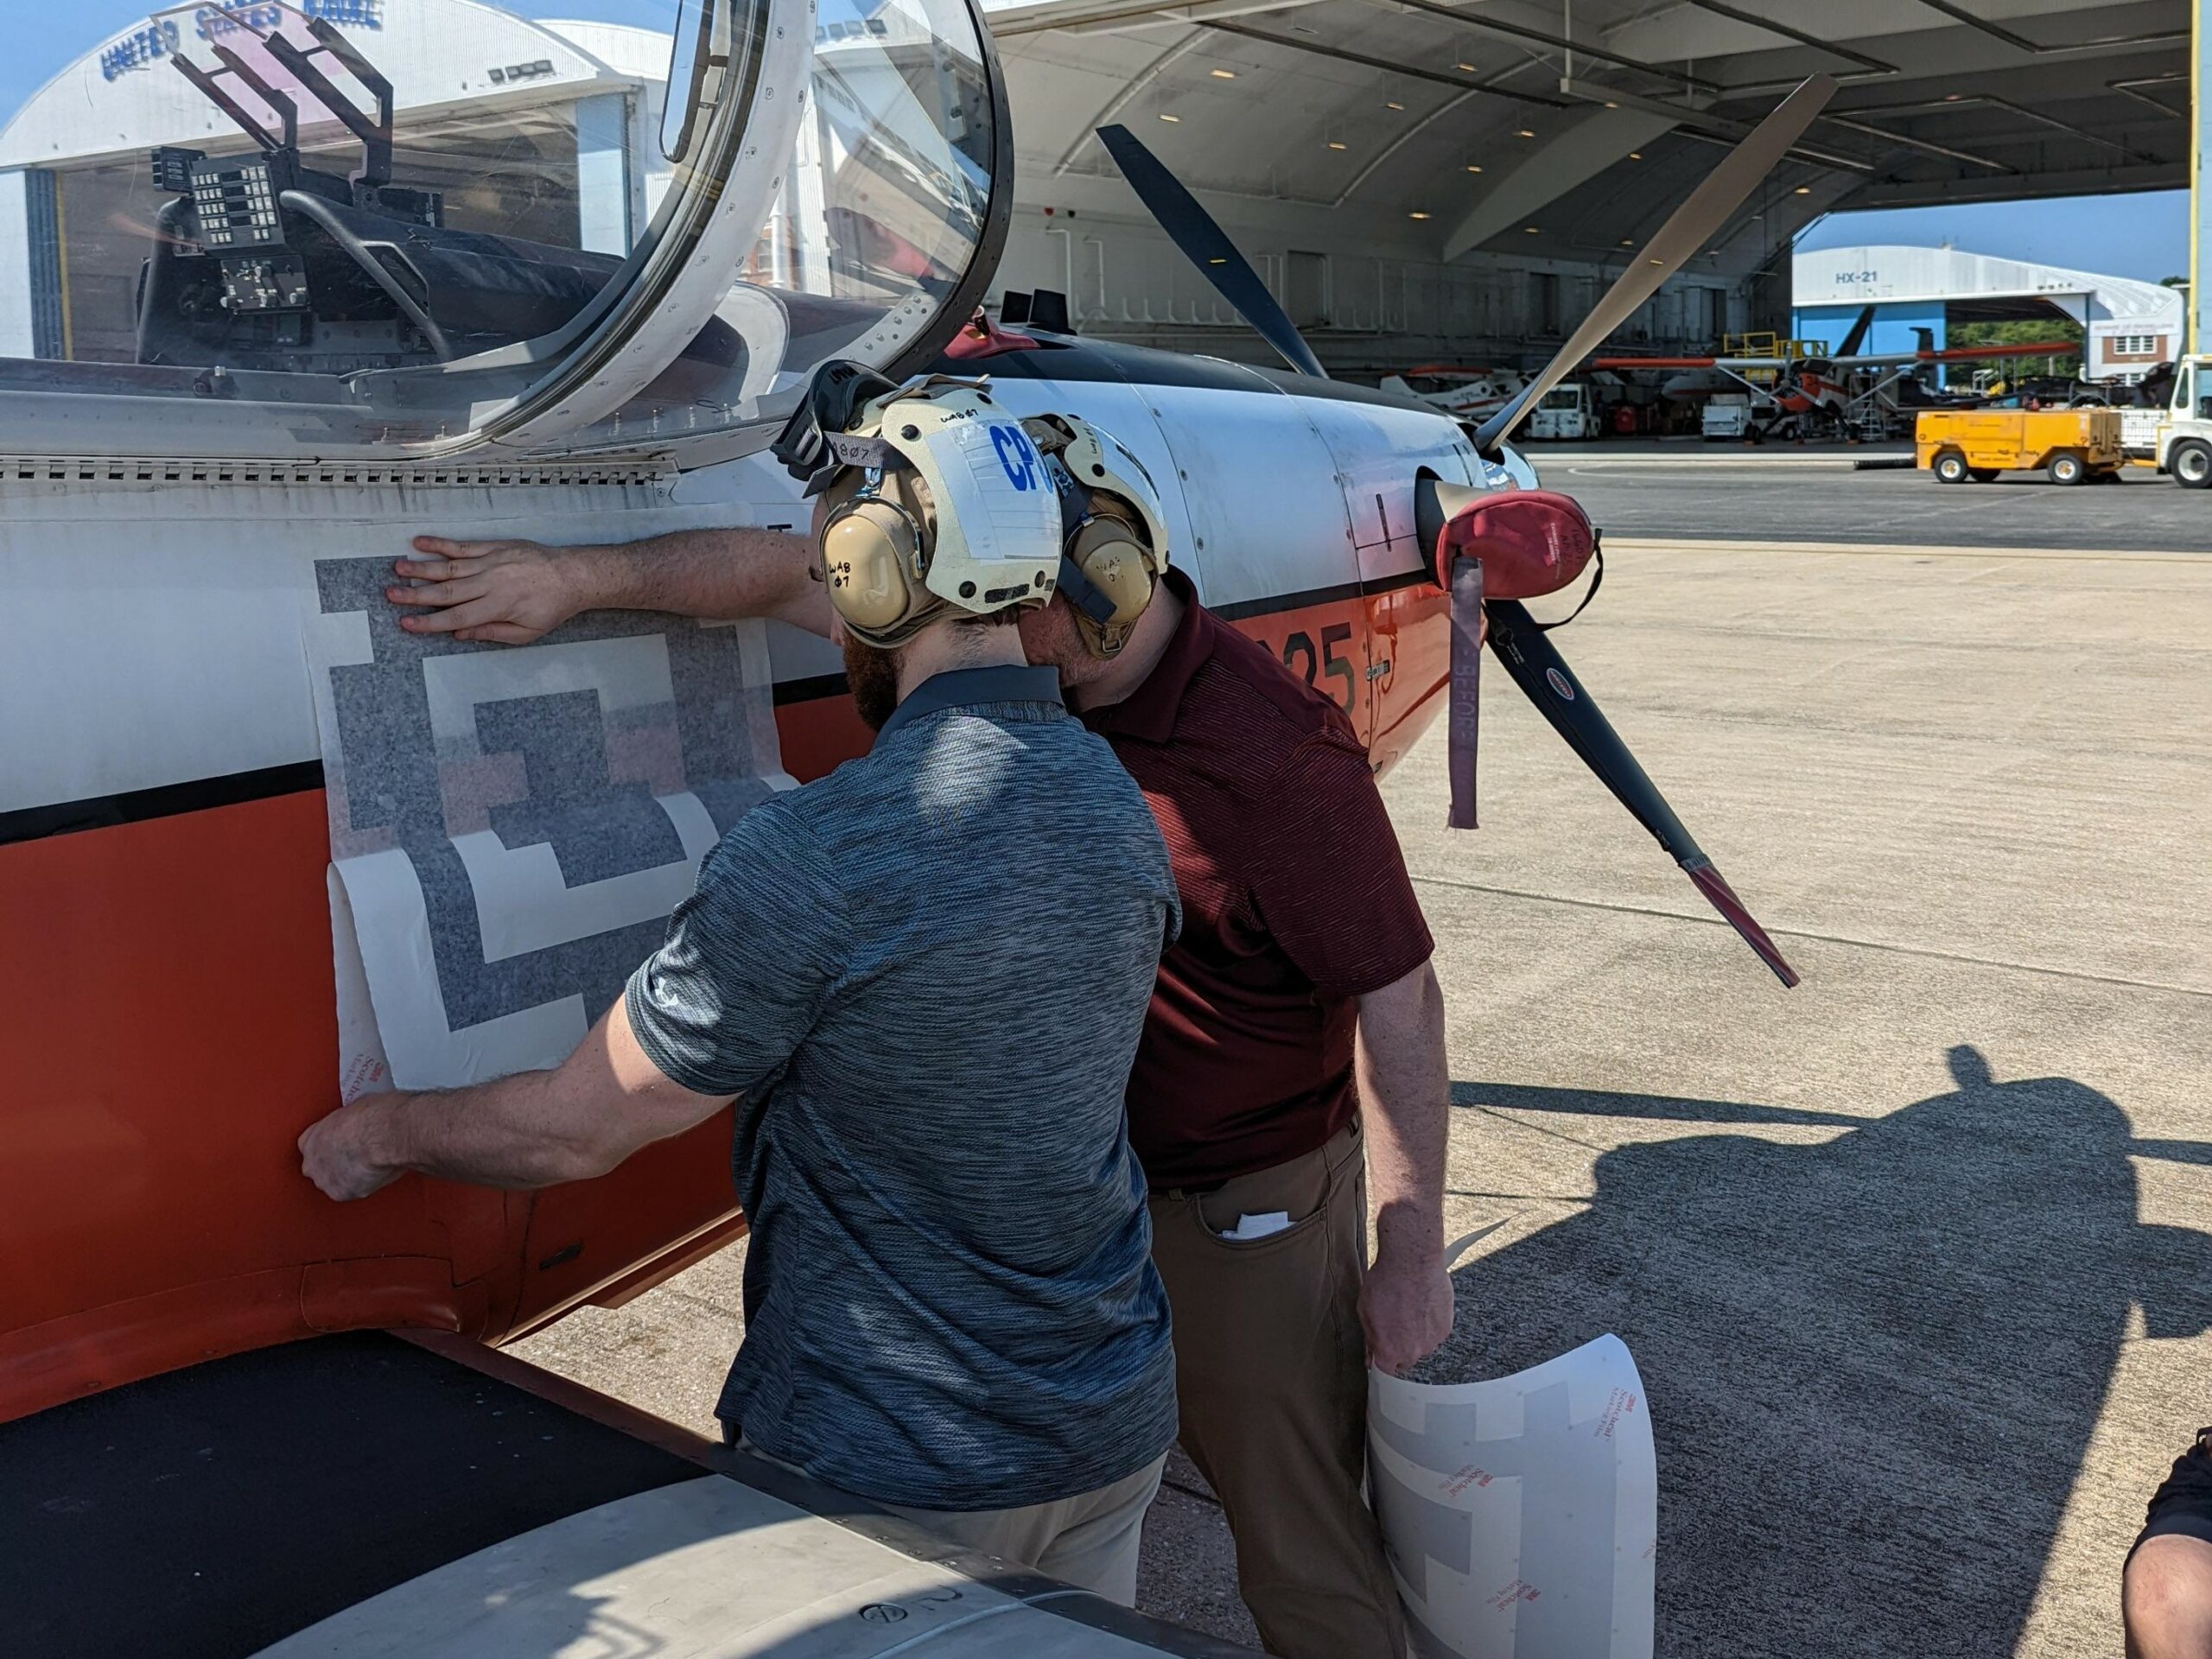 Engineers from the Naval Air Warfare Center Aircraft Division apply a fiducial tag aboard a T-6 Texan to autonomously capture arrival and departure data during ground operations in an experiment at Naval Air Station Patuxent River, Maryland in 2022. (U.S. Navy photo)